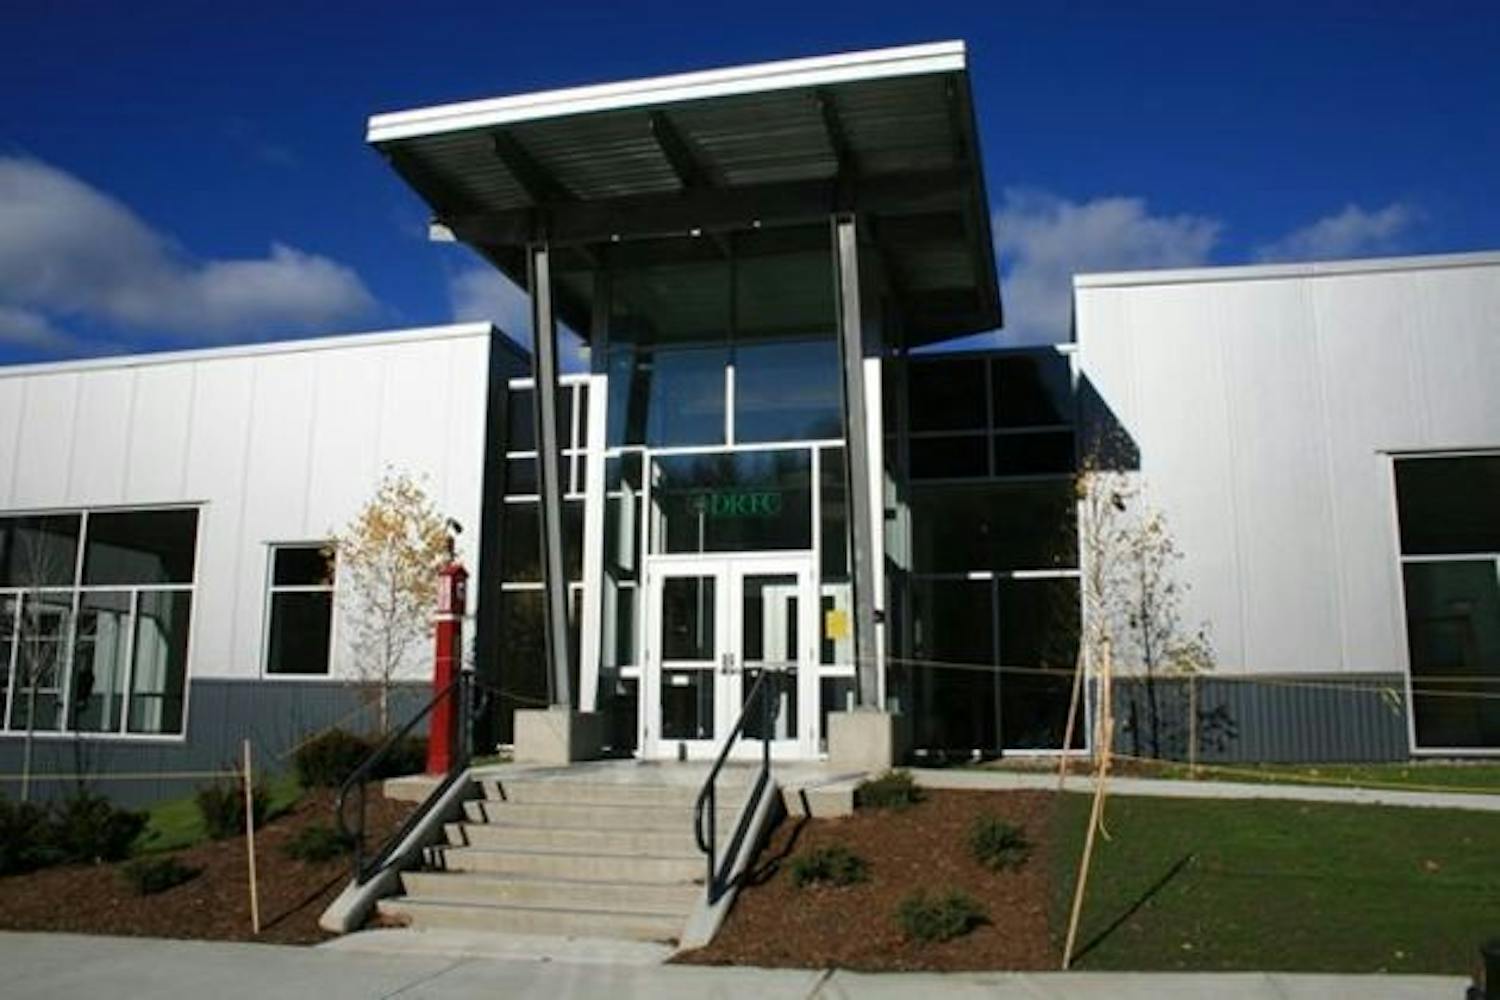 The Dartmouth Regional Technology Center provides resources and facilities to high-tech startup companies.